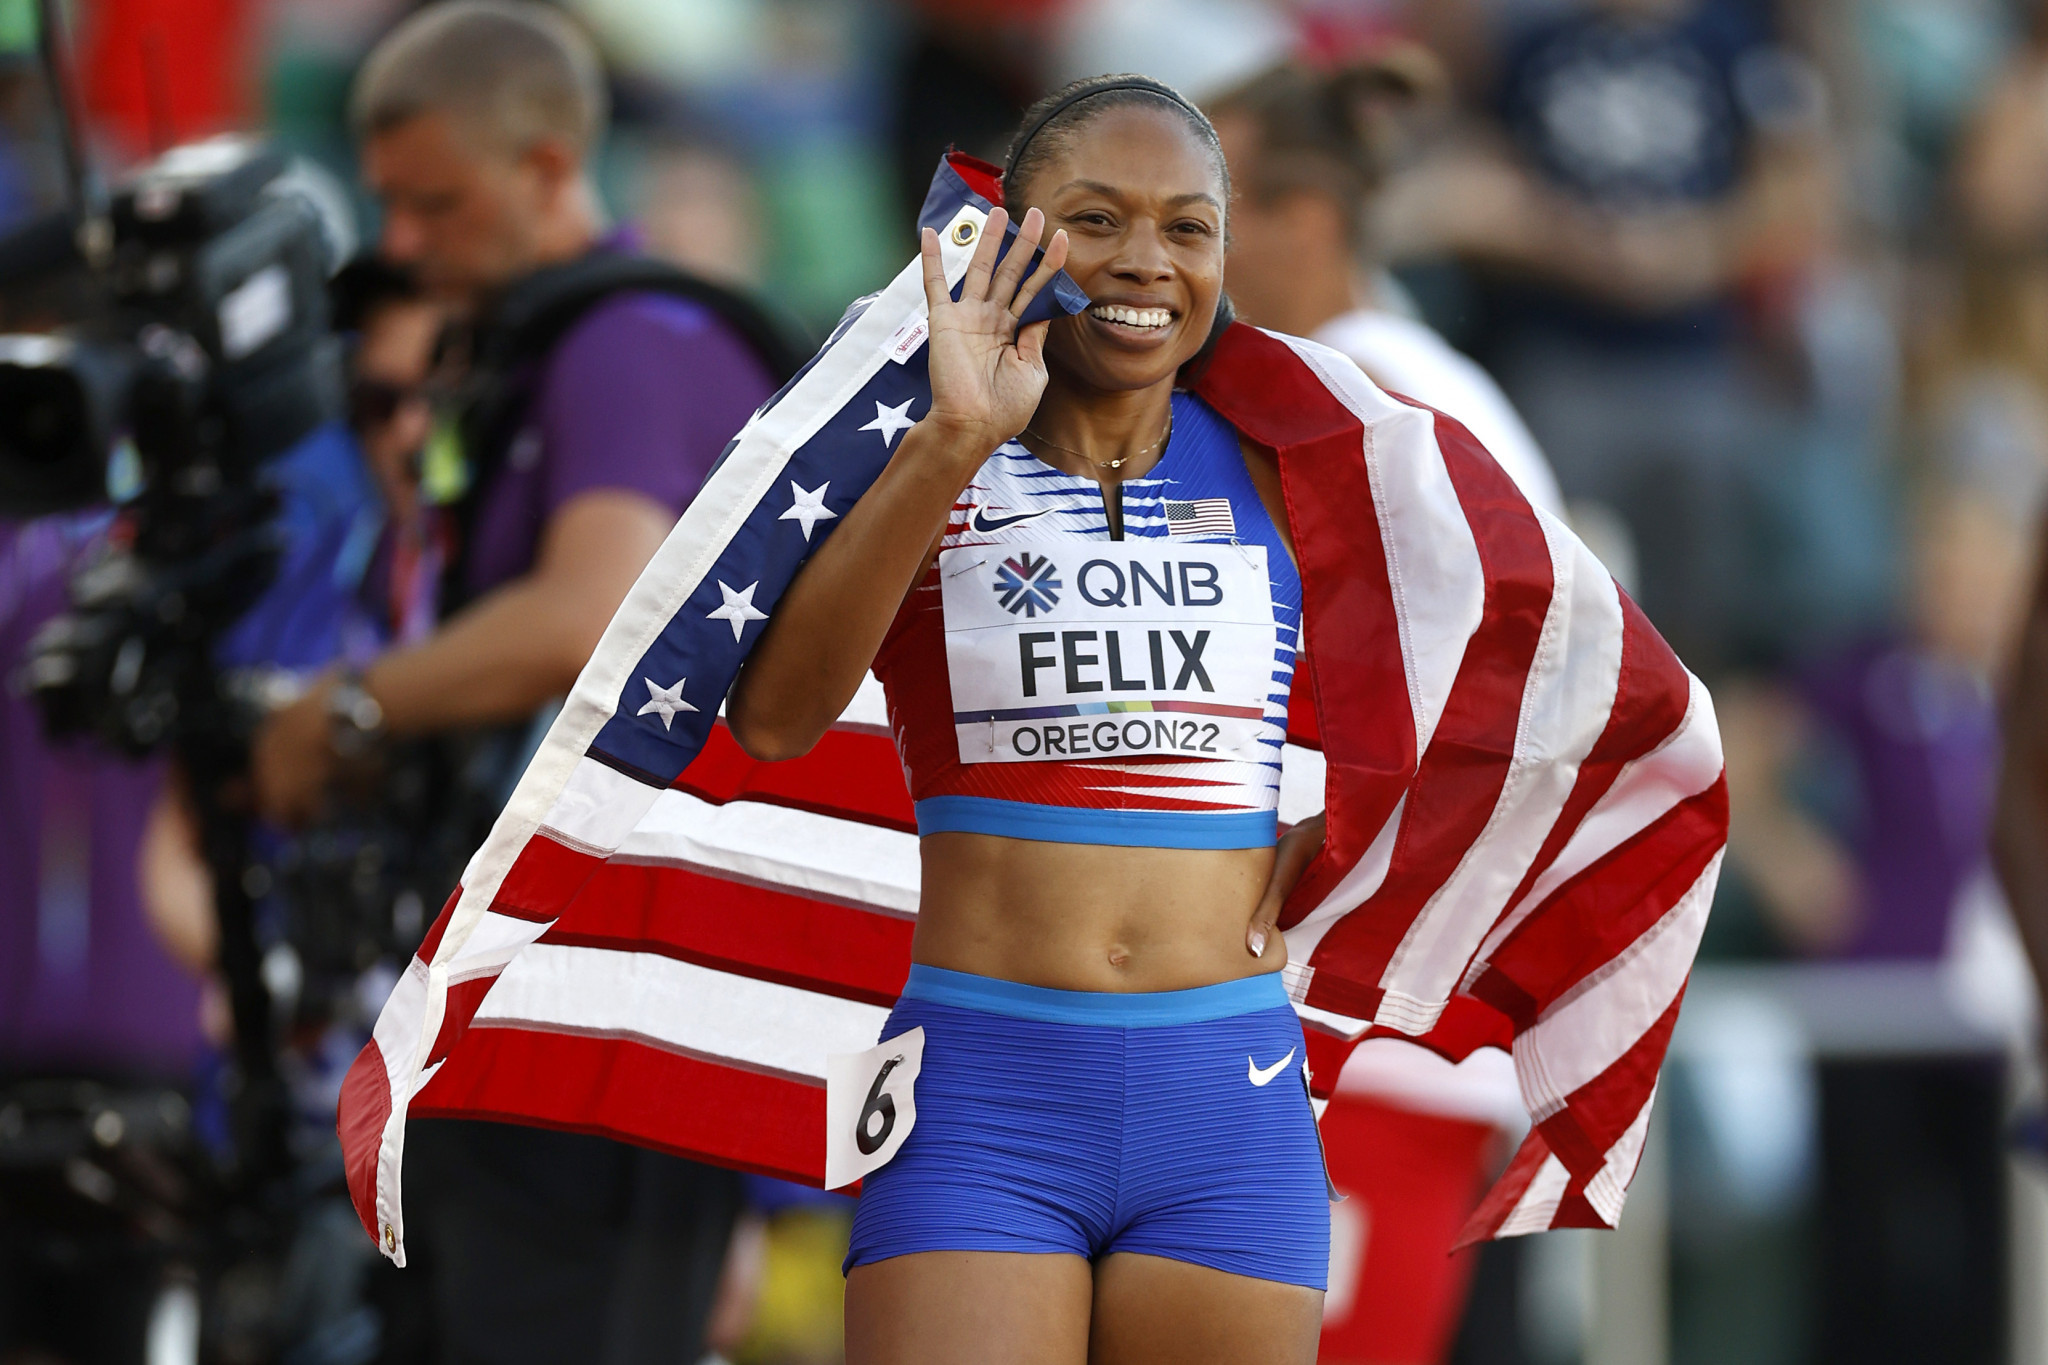 The 36-year-old Allyson Felix ran the last race of her long career and claimed her 18th World Athletics Championships medal with a bronze ©Getty Images